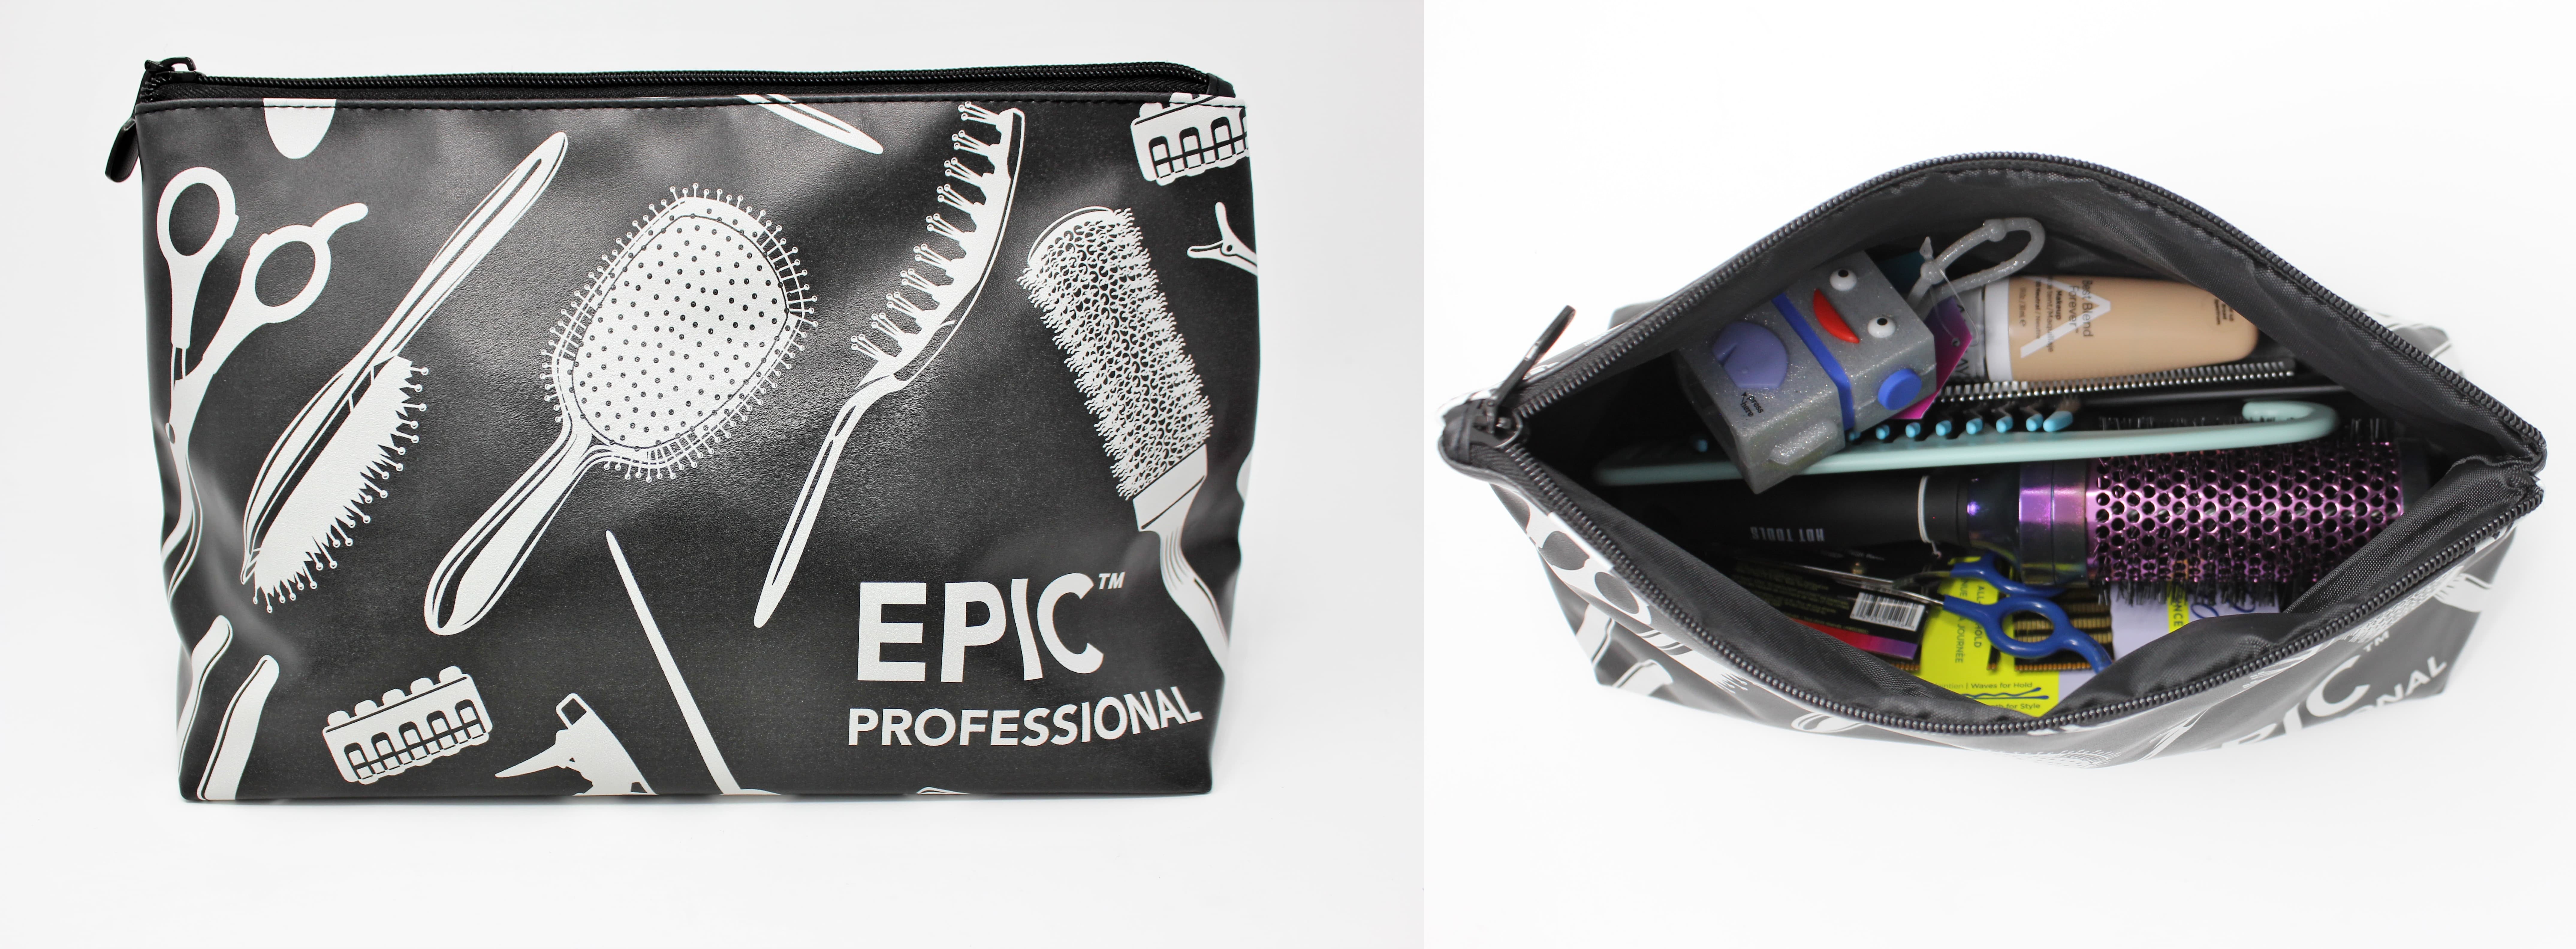 Epic Promotional Brand Cosmetic Zipper Bag - Dimensions: 13.5 X 5.5 X 8" Inches